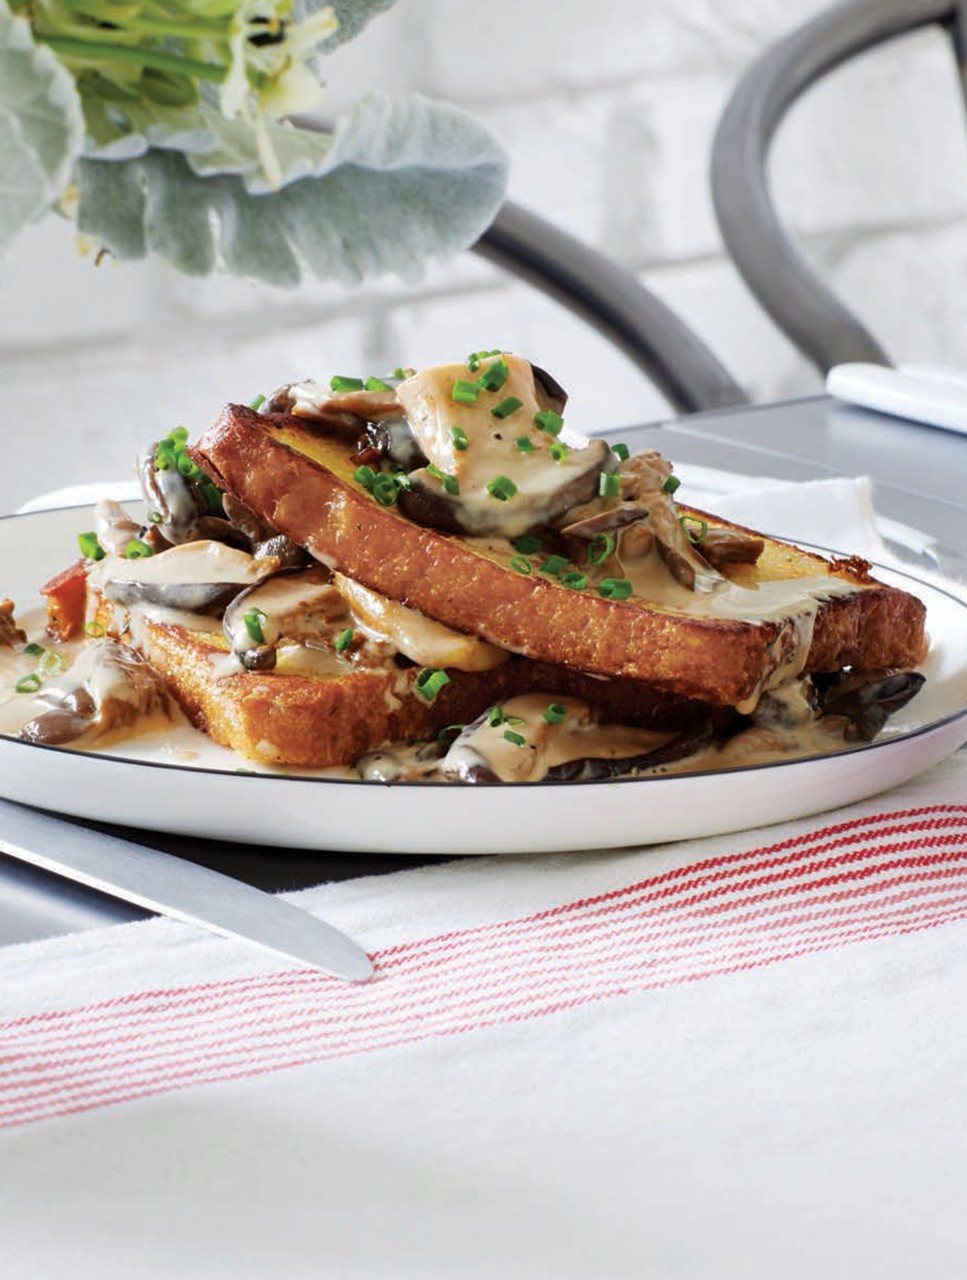 Parmesan French Toast with Mushroom Fricassée